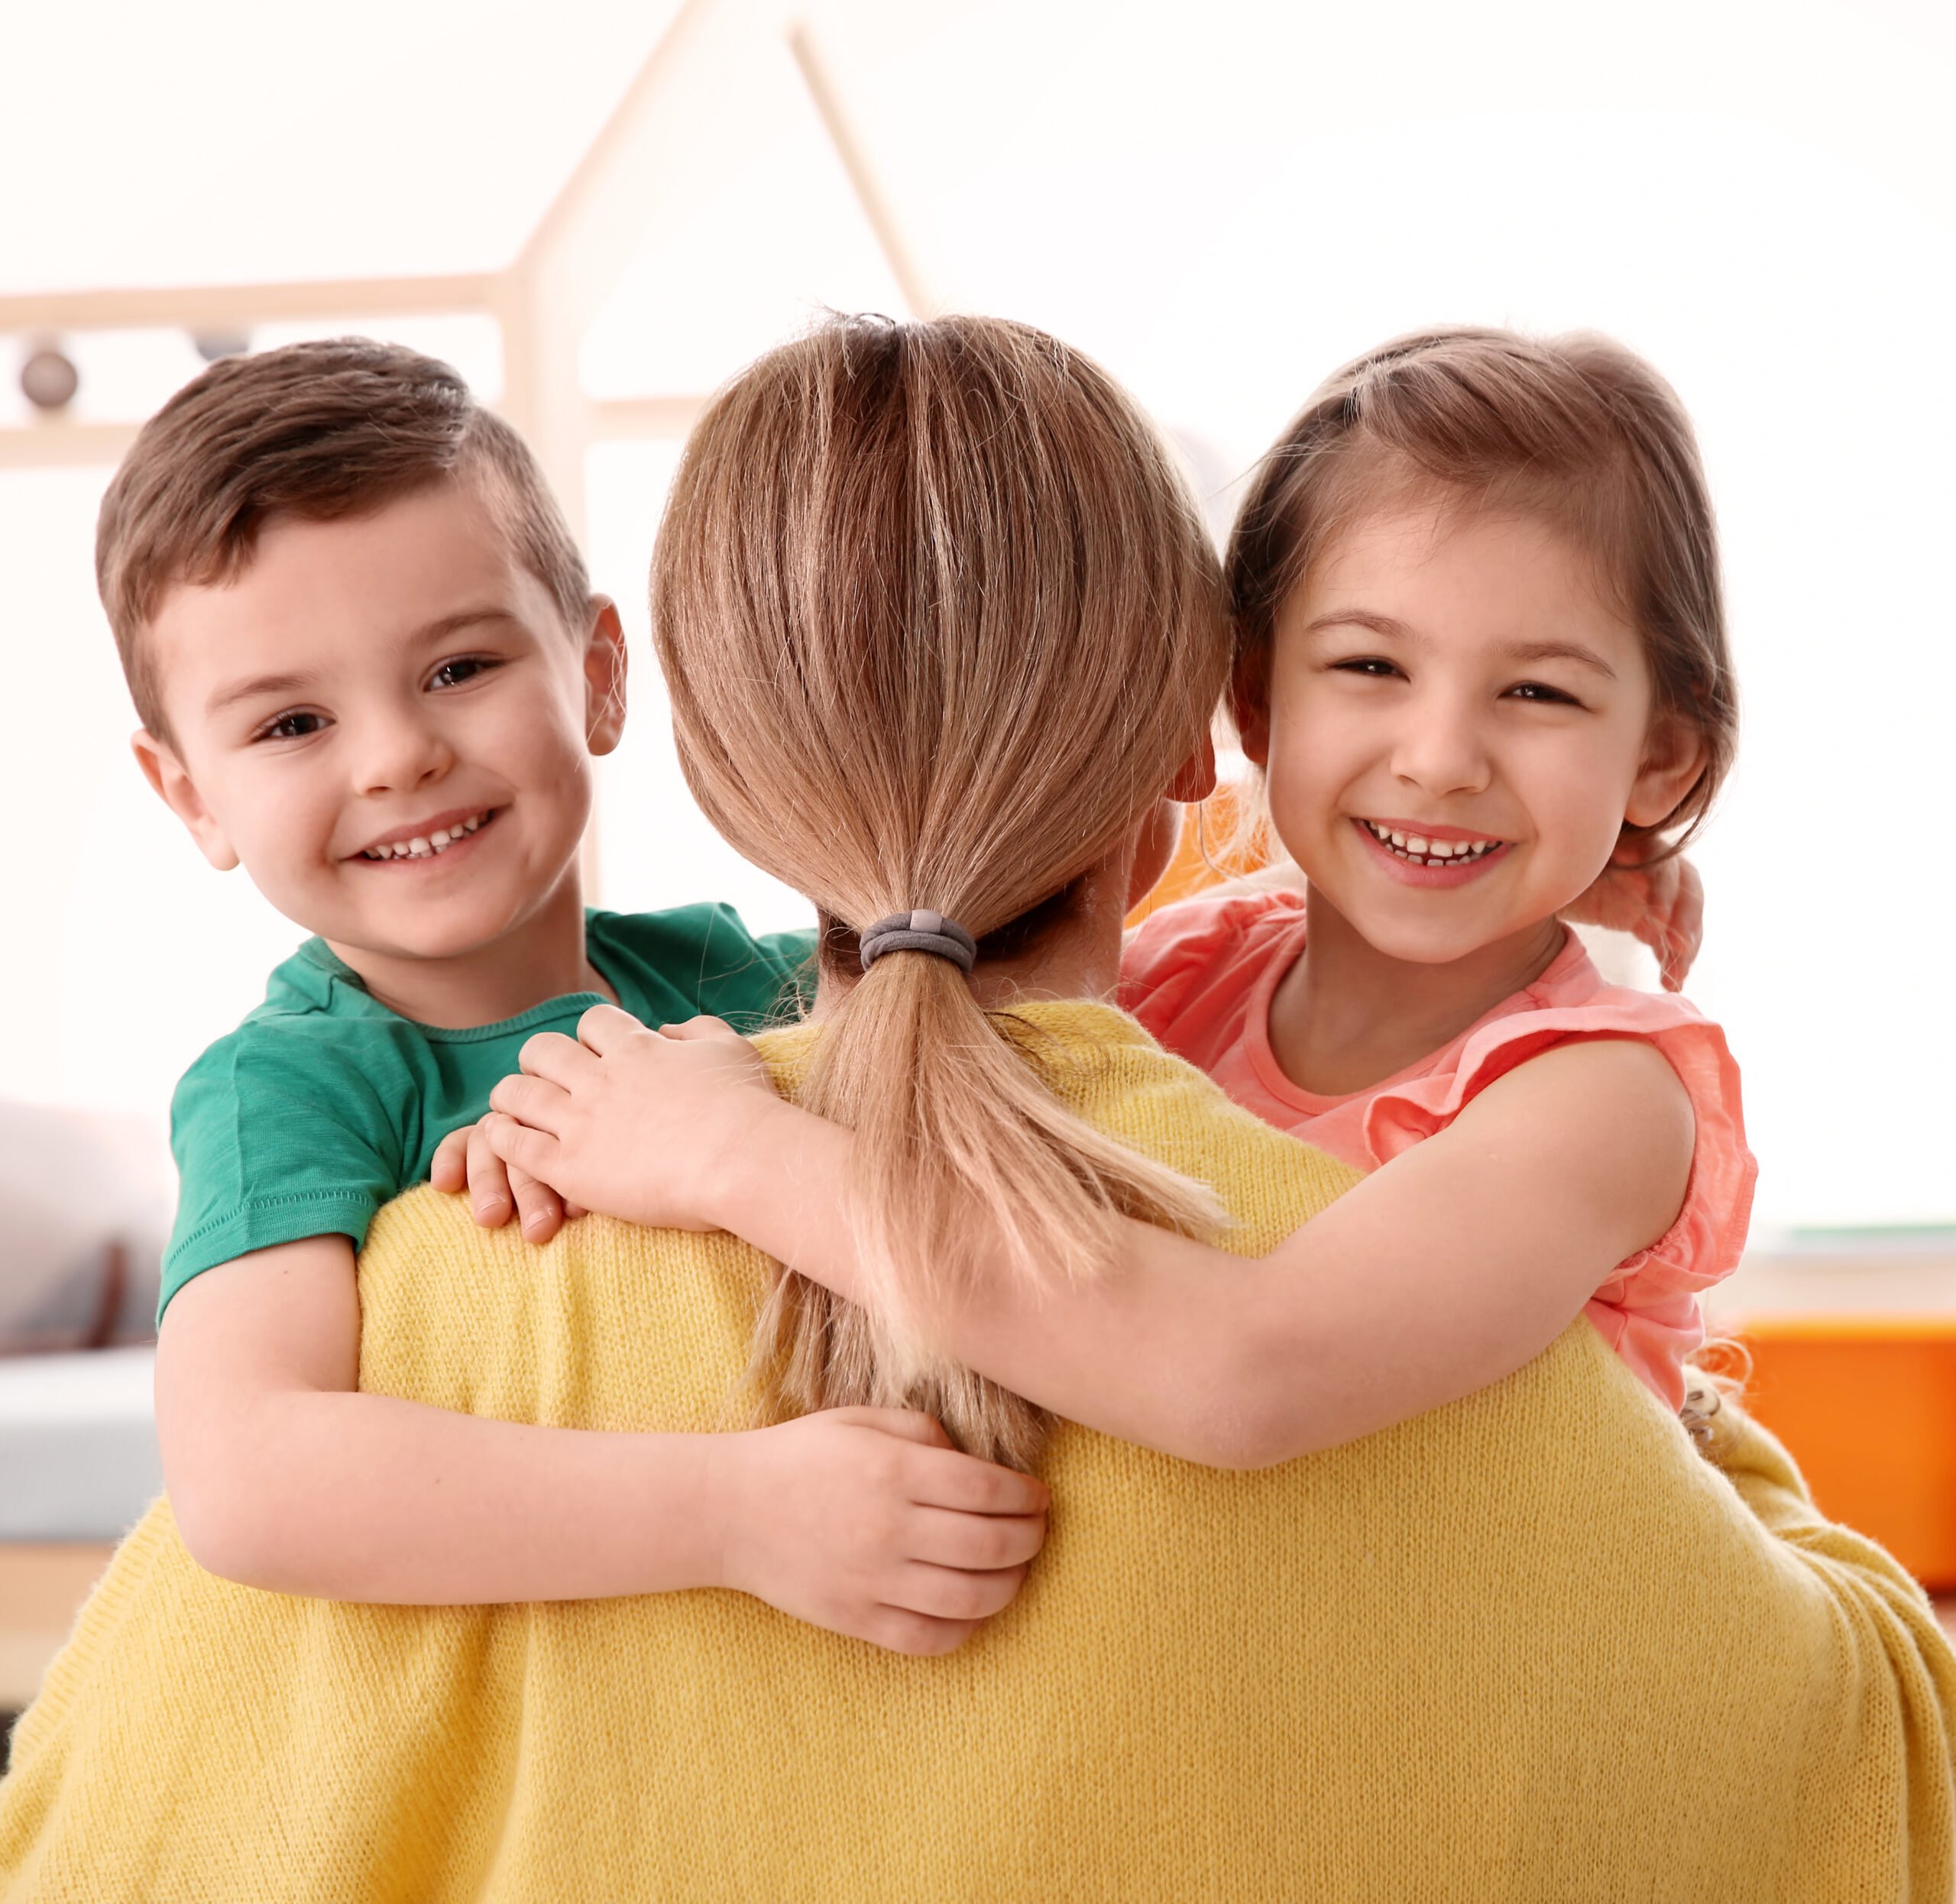 childminder holding a young boy and girl smiling